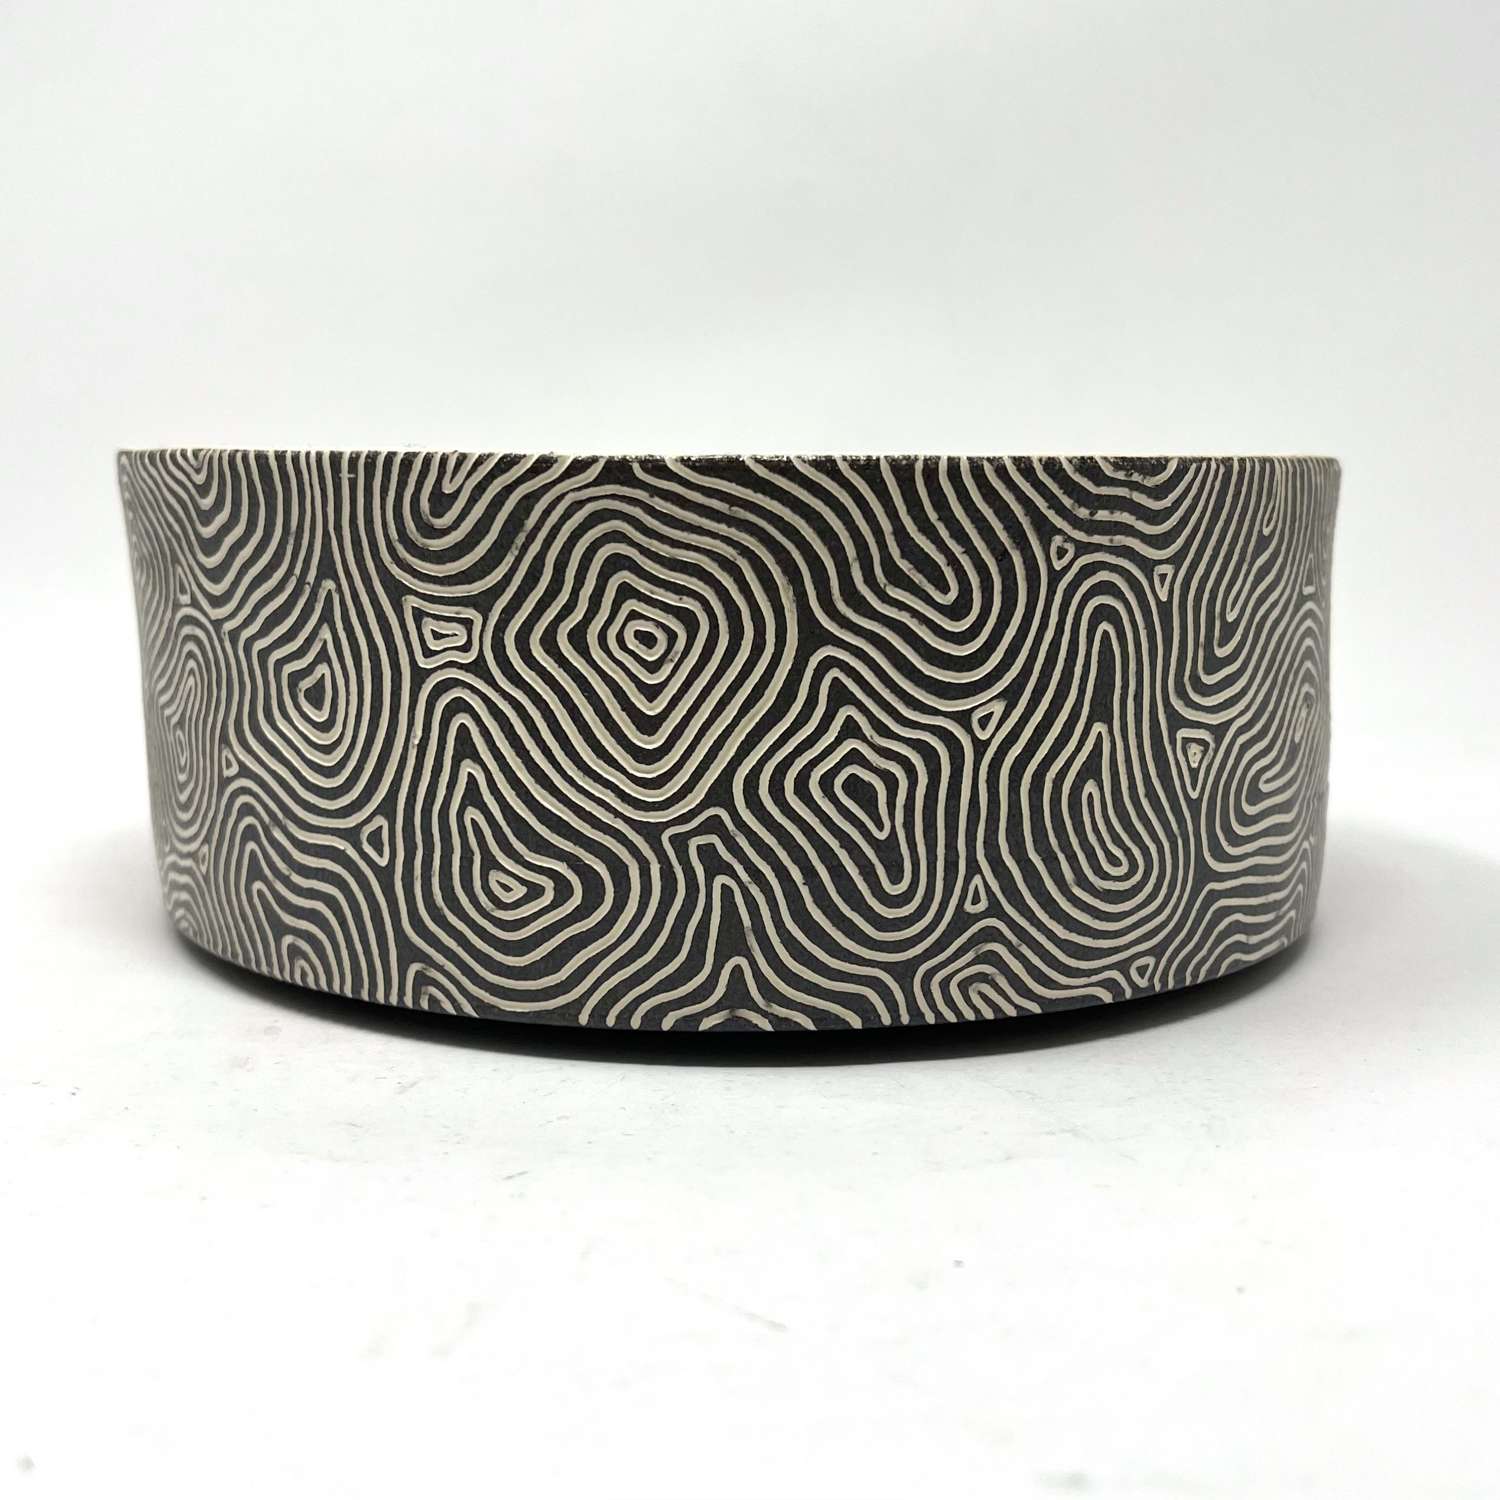 Colin Jowitt earthenware bowl with sgraffito decoration 2016